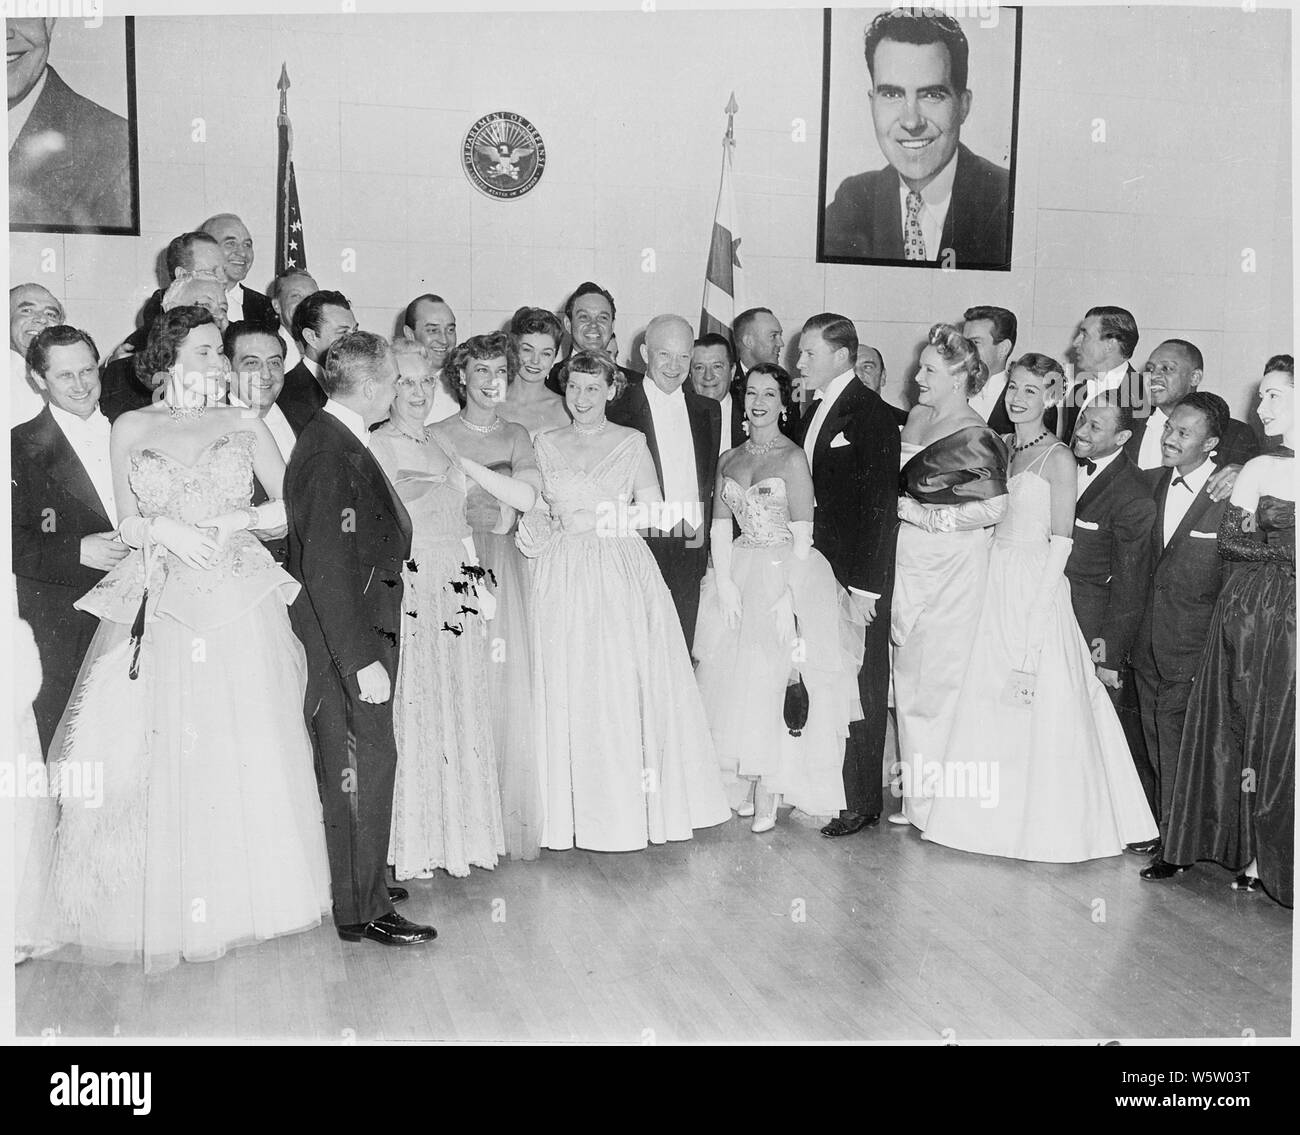 Photograph of President Dwight D. Eisenhower and his wife Mamie with other guests at the Inaugural ball. Stock Photo